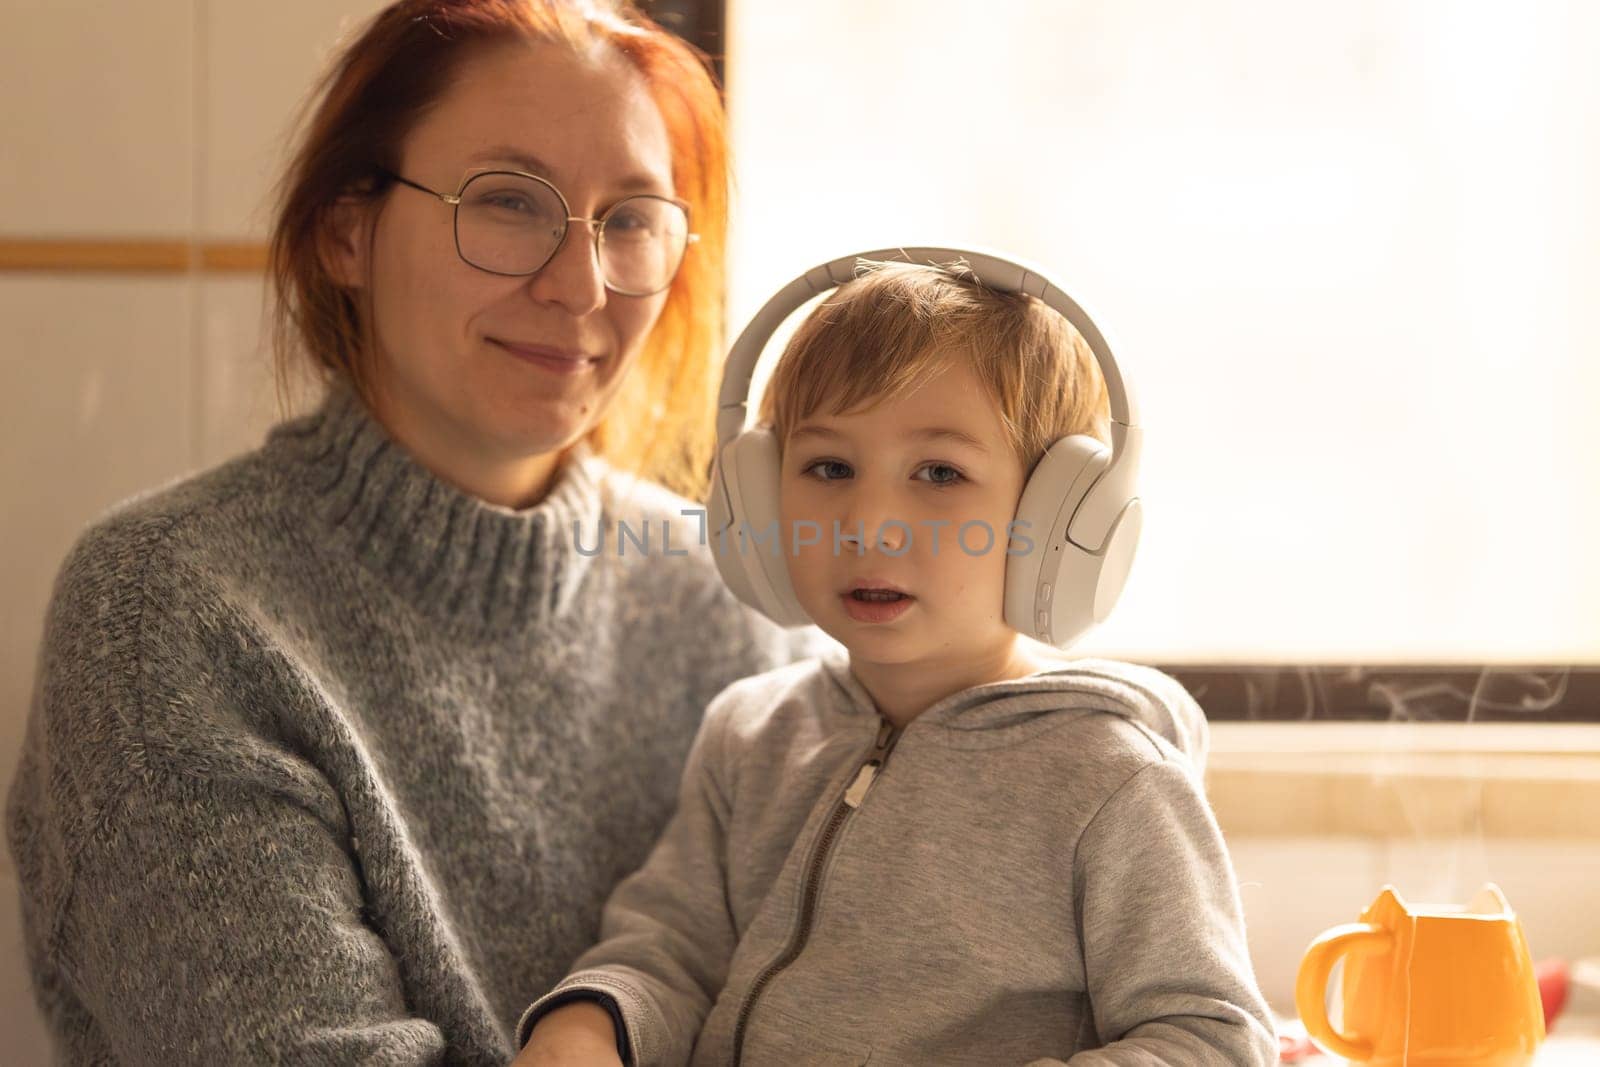 A woman and a child wearing headphones in a kitchen